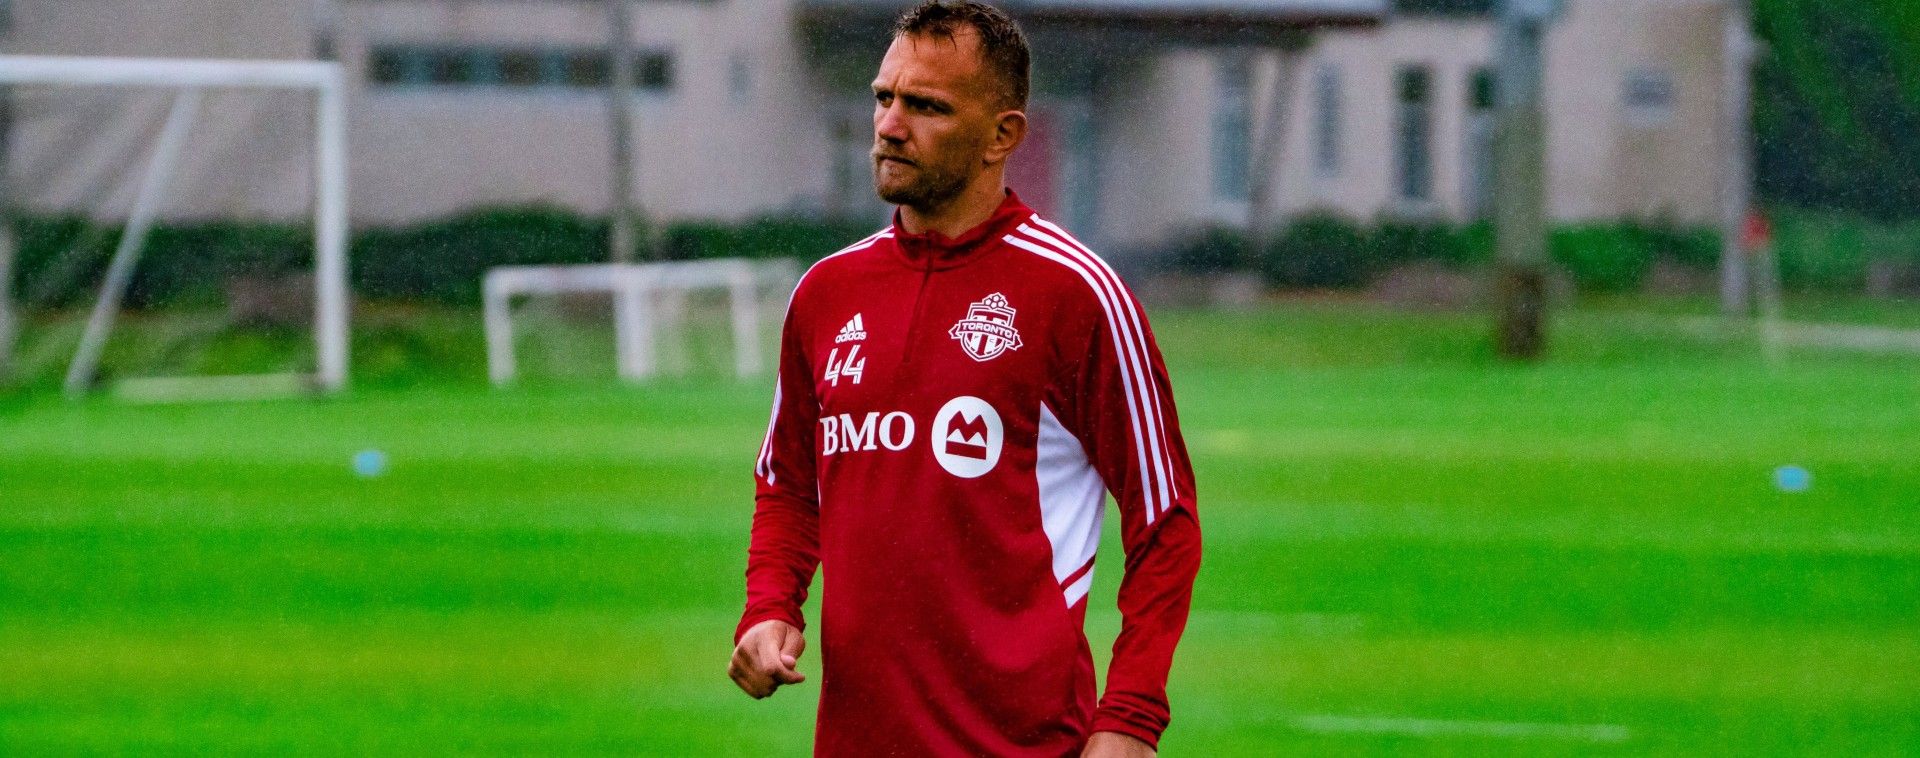 Tactical breakdown: Criscito at epicentre of TFC's buildup play